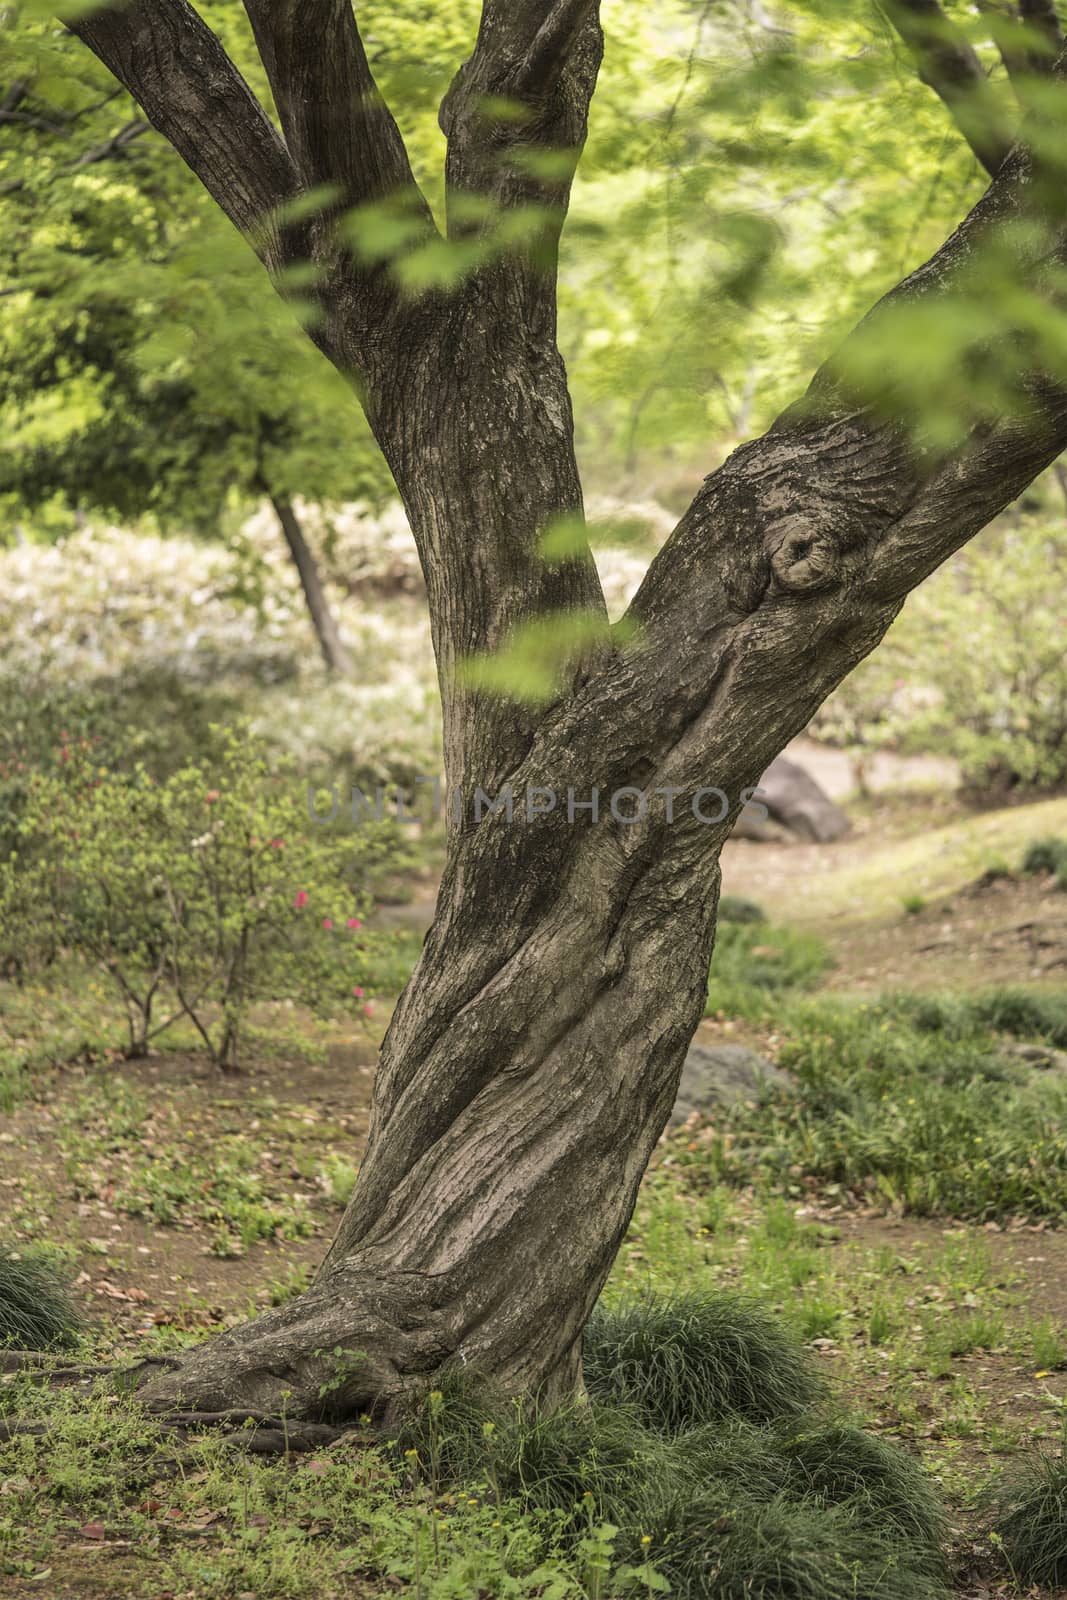 The Y-shaped twisted trunk of a maple tree in the Rikugien park garden in Bunkyo district, north of Tokyo. The park was created at the beginning of the 18th century.